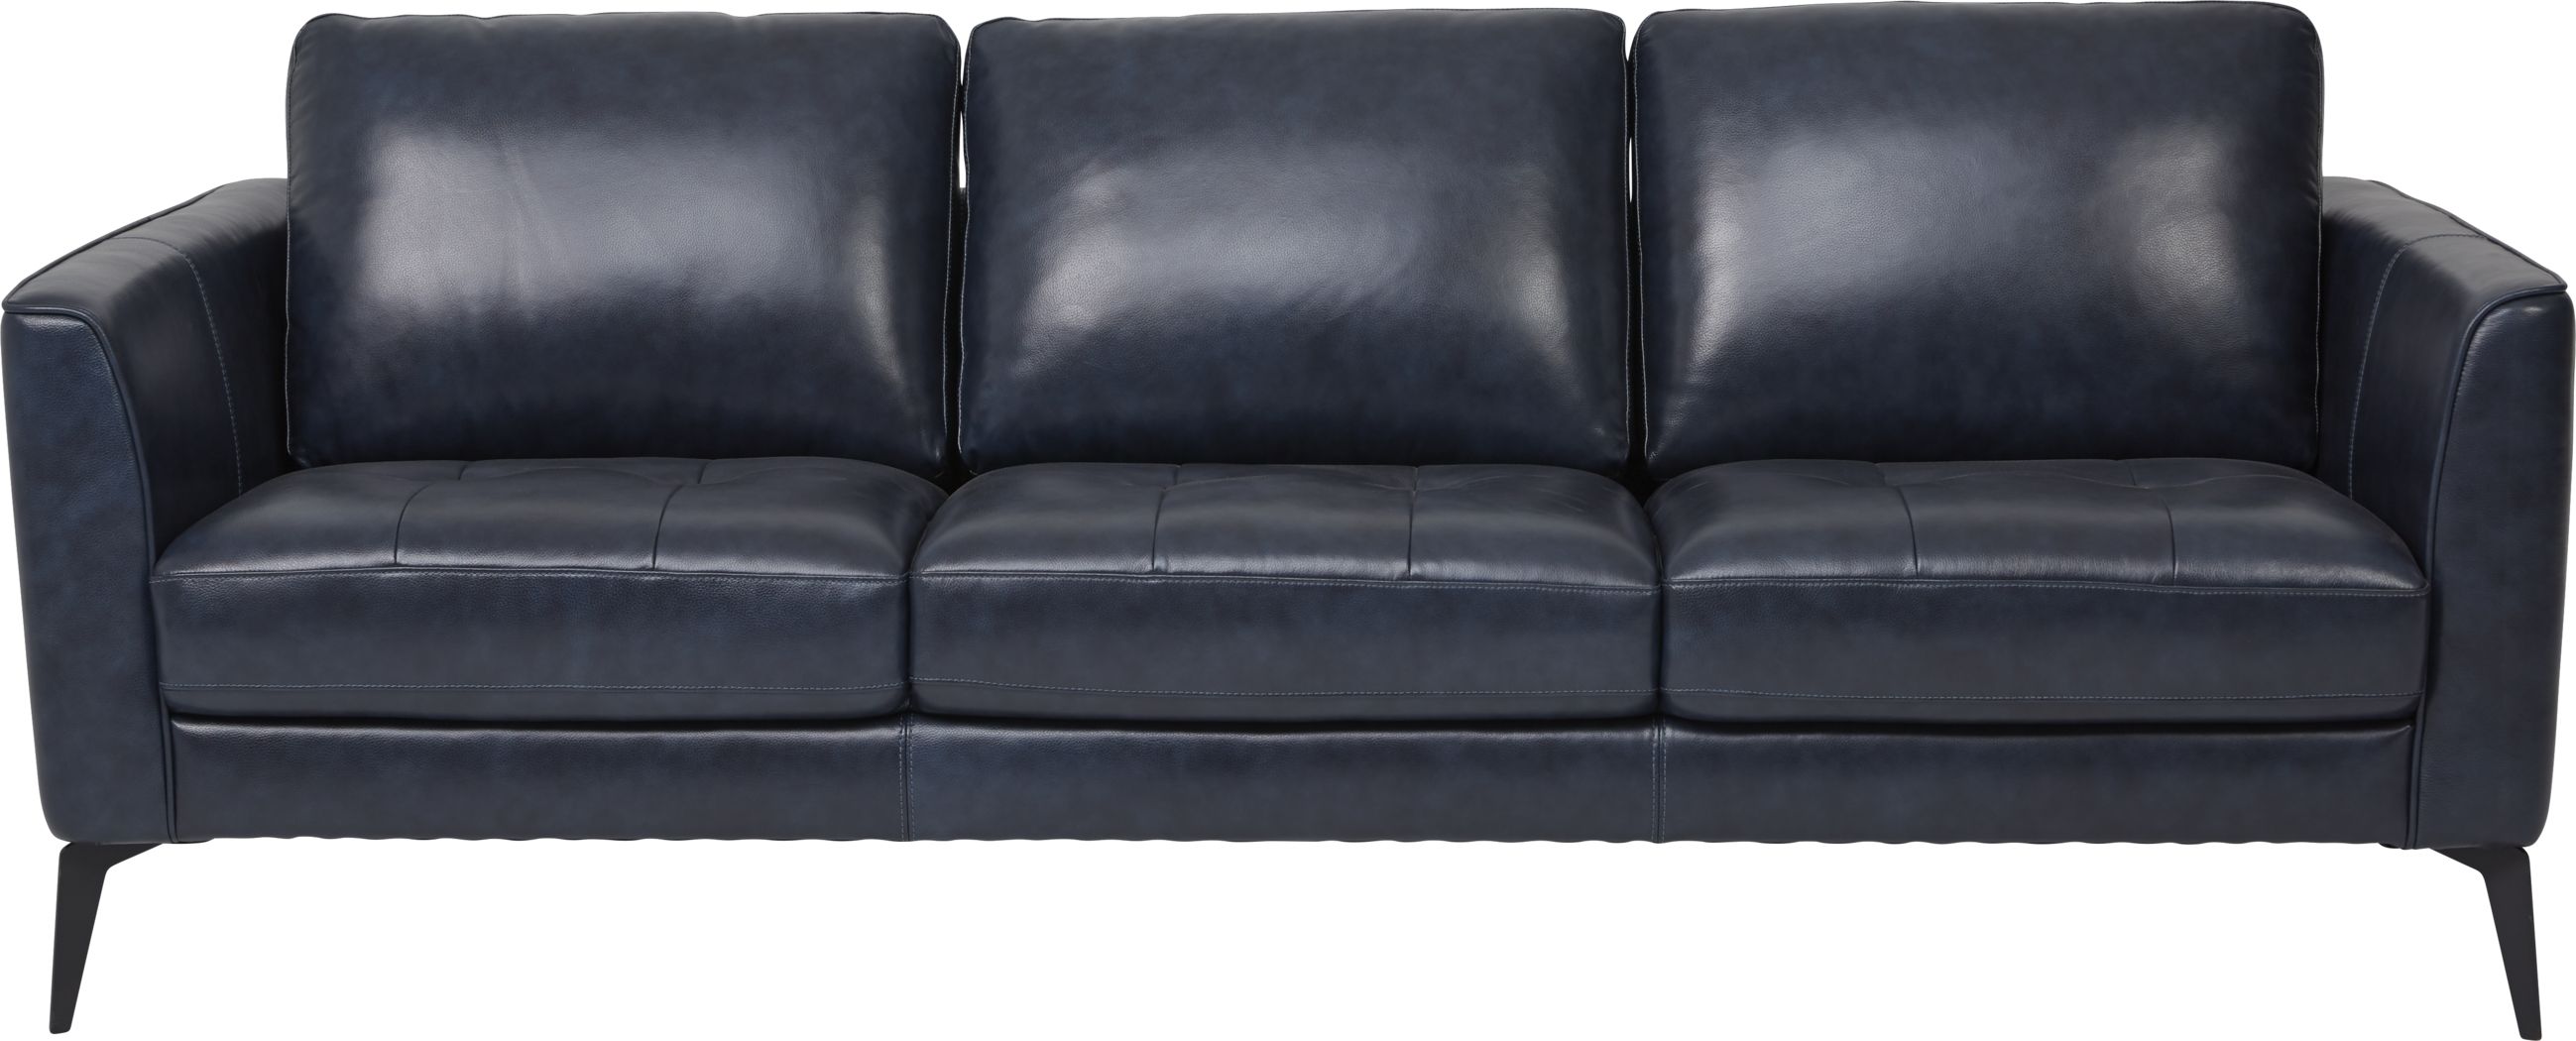 Leather Living Room Furniture, Rooms To Go Leather Couches